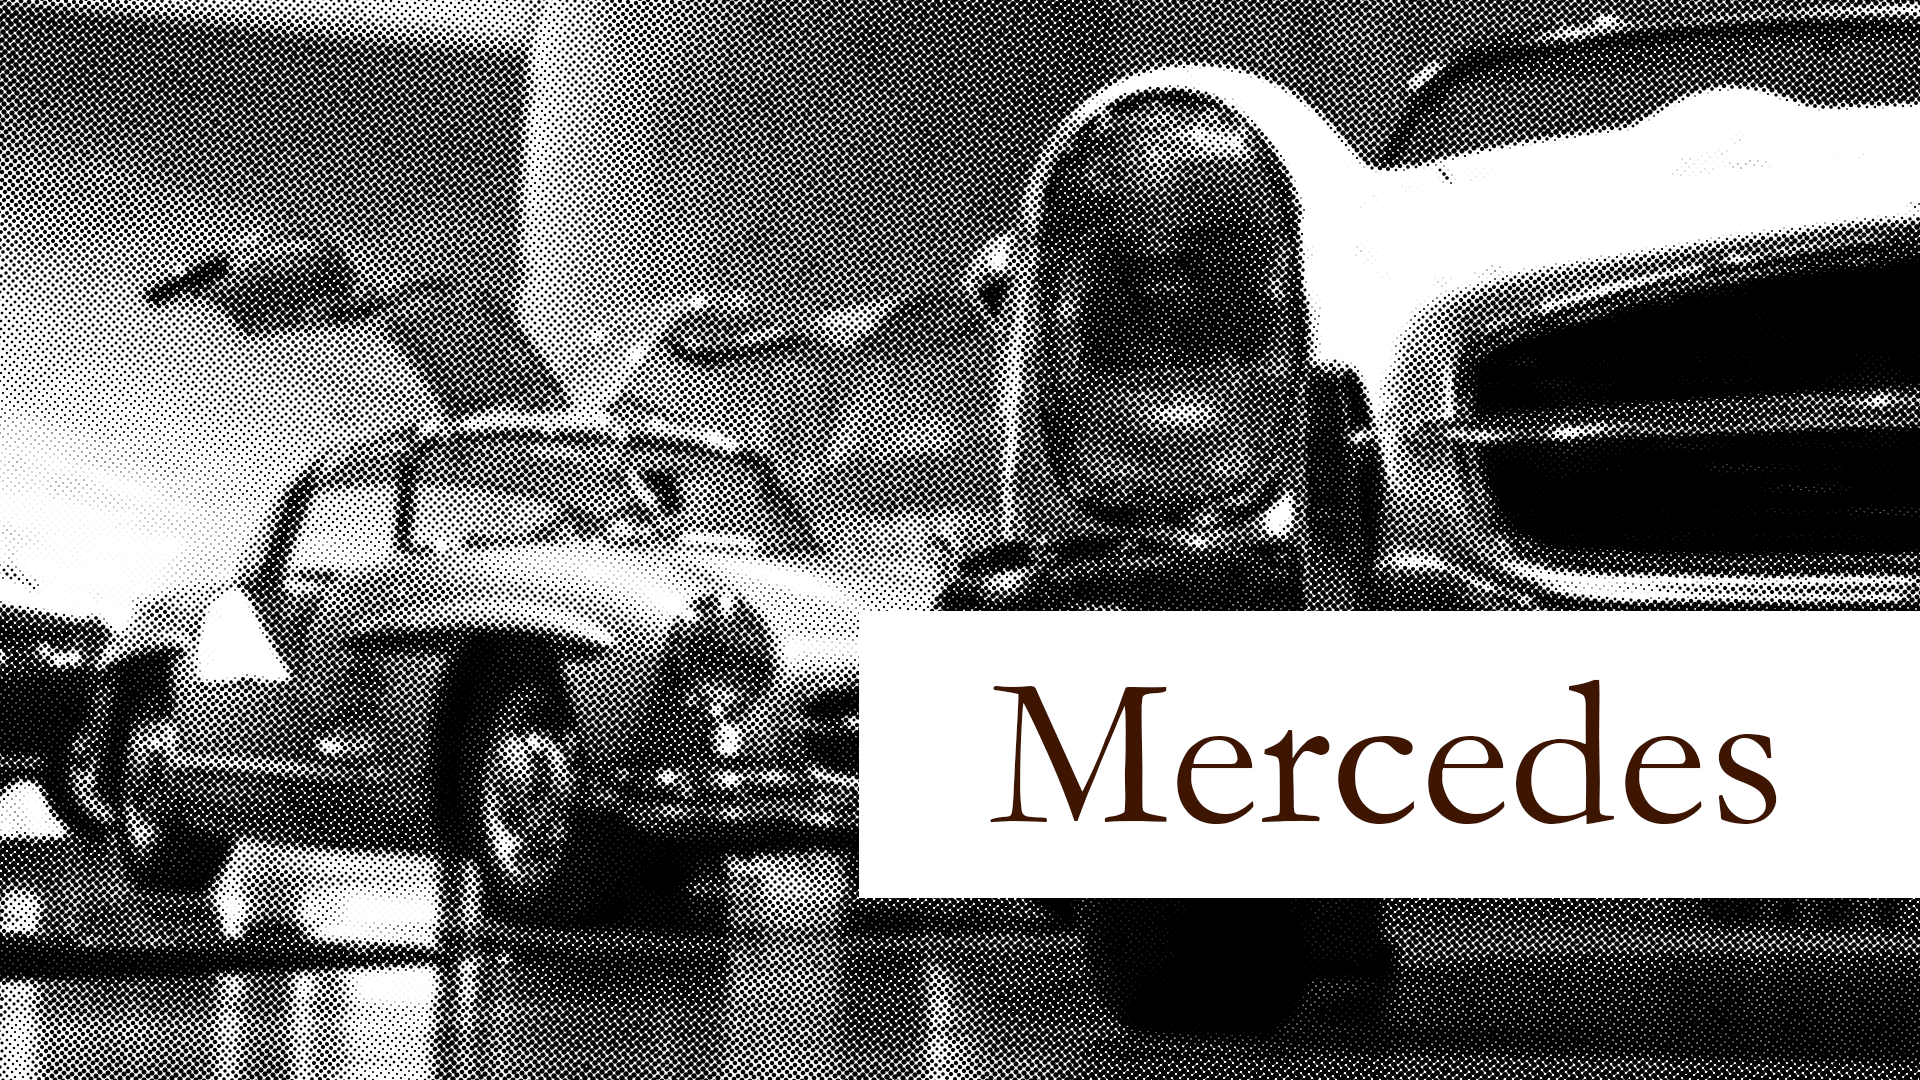 Mercedes: a well-known name with good innovations